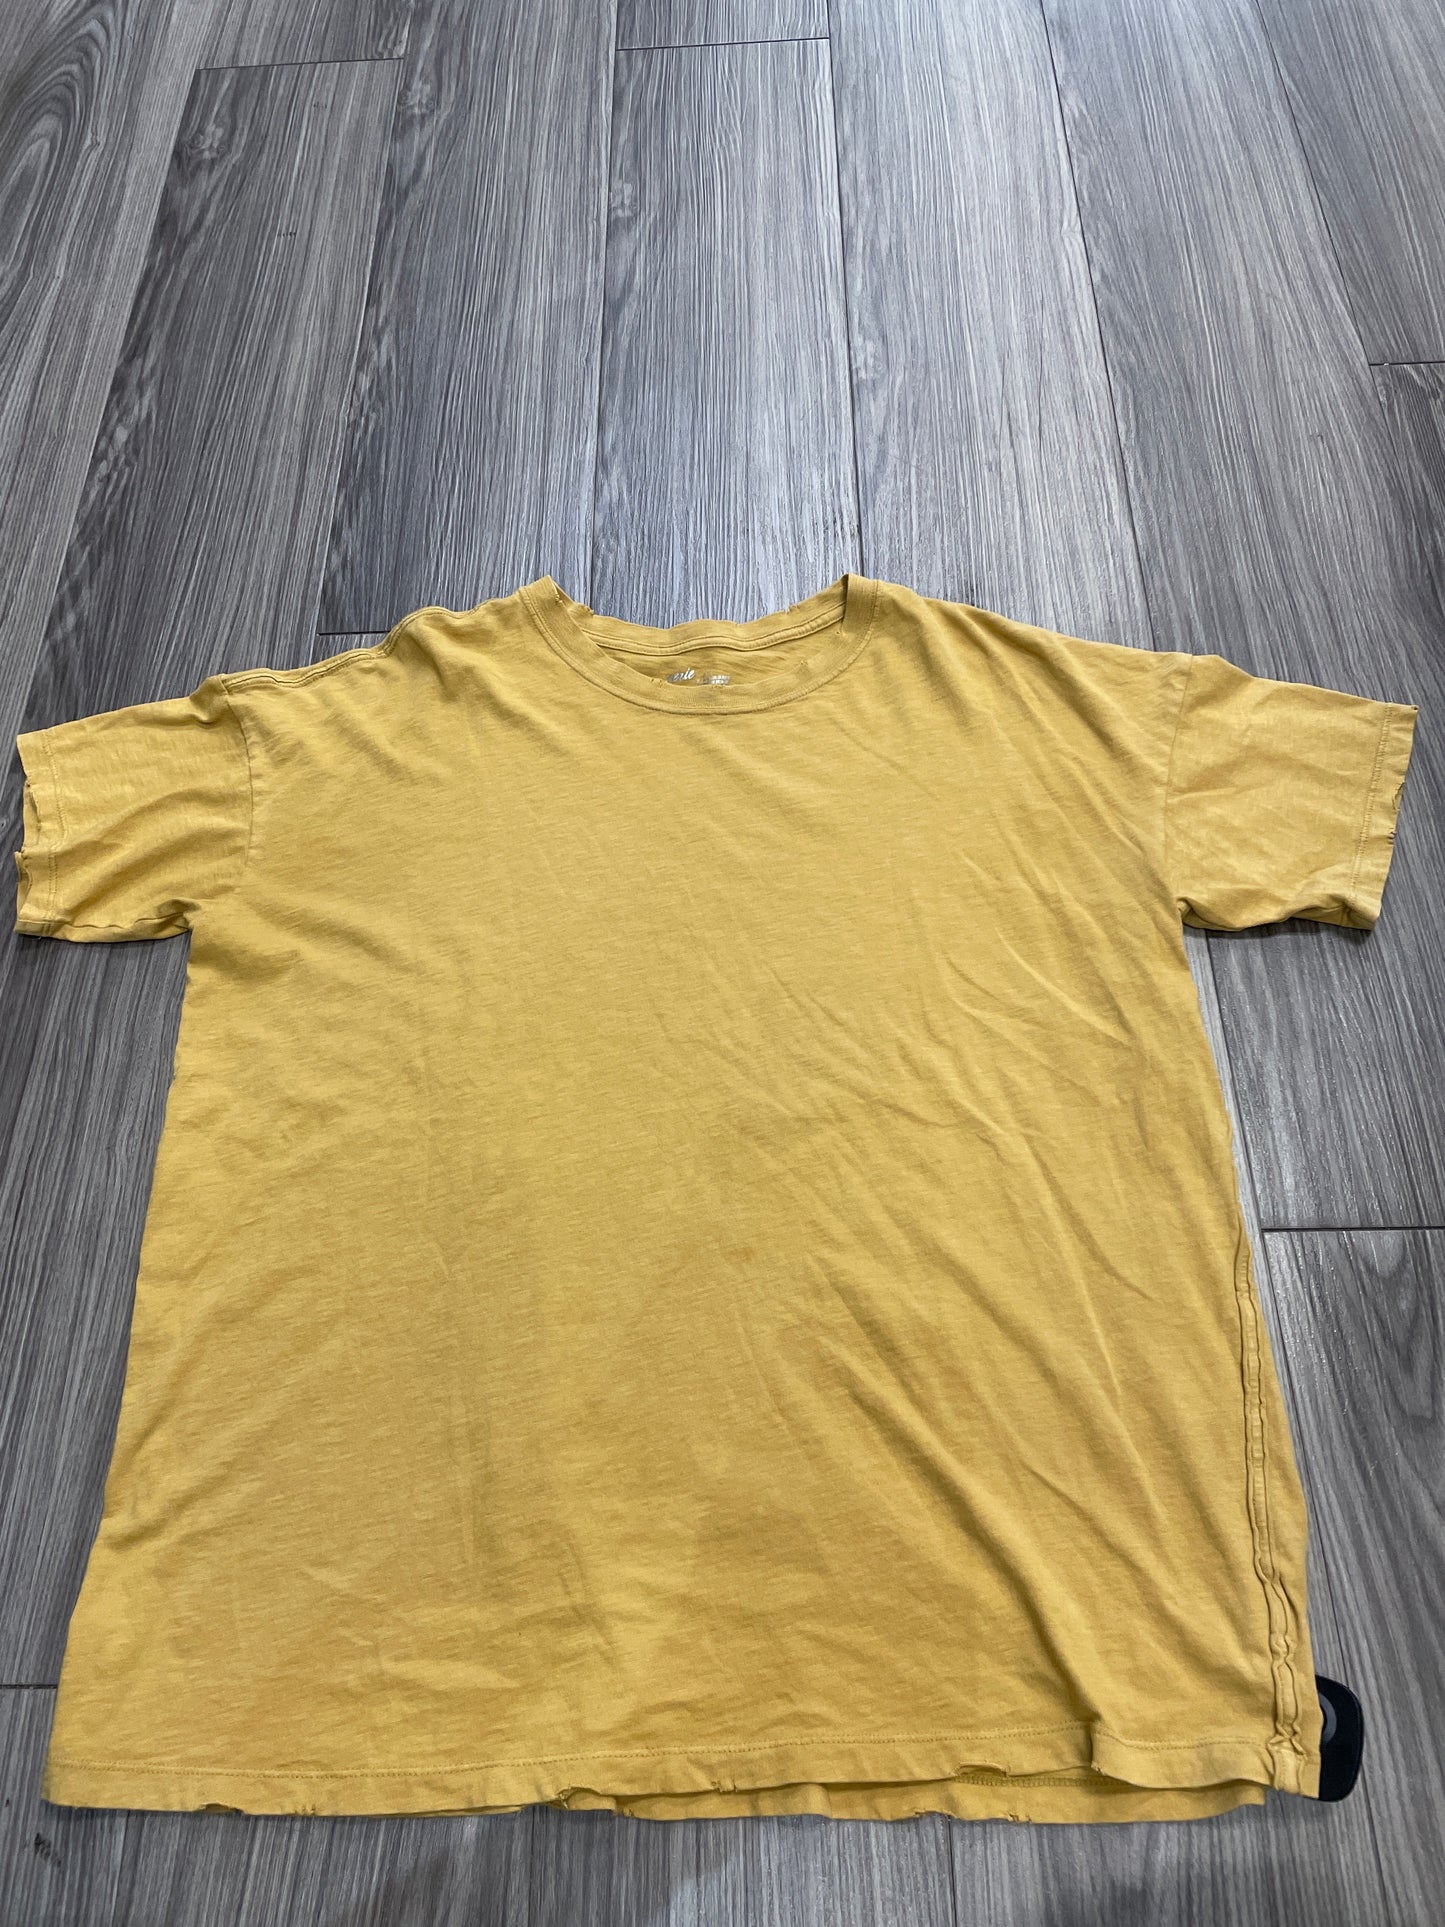 Yellow Top Short Sleeve Aerie, Size S